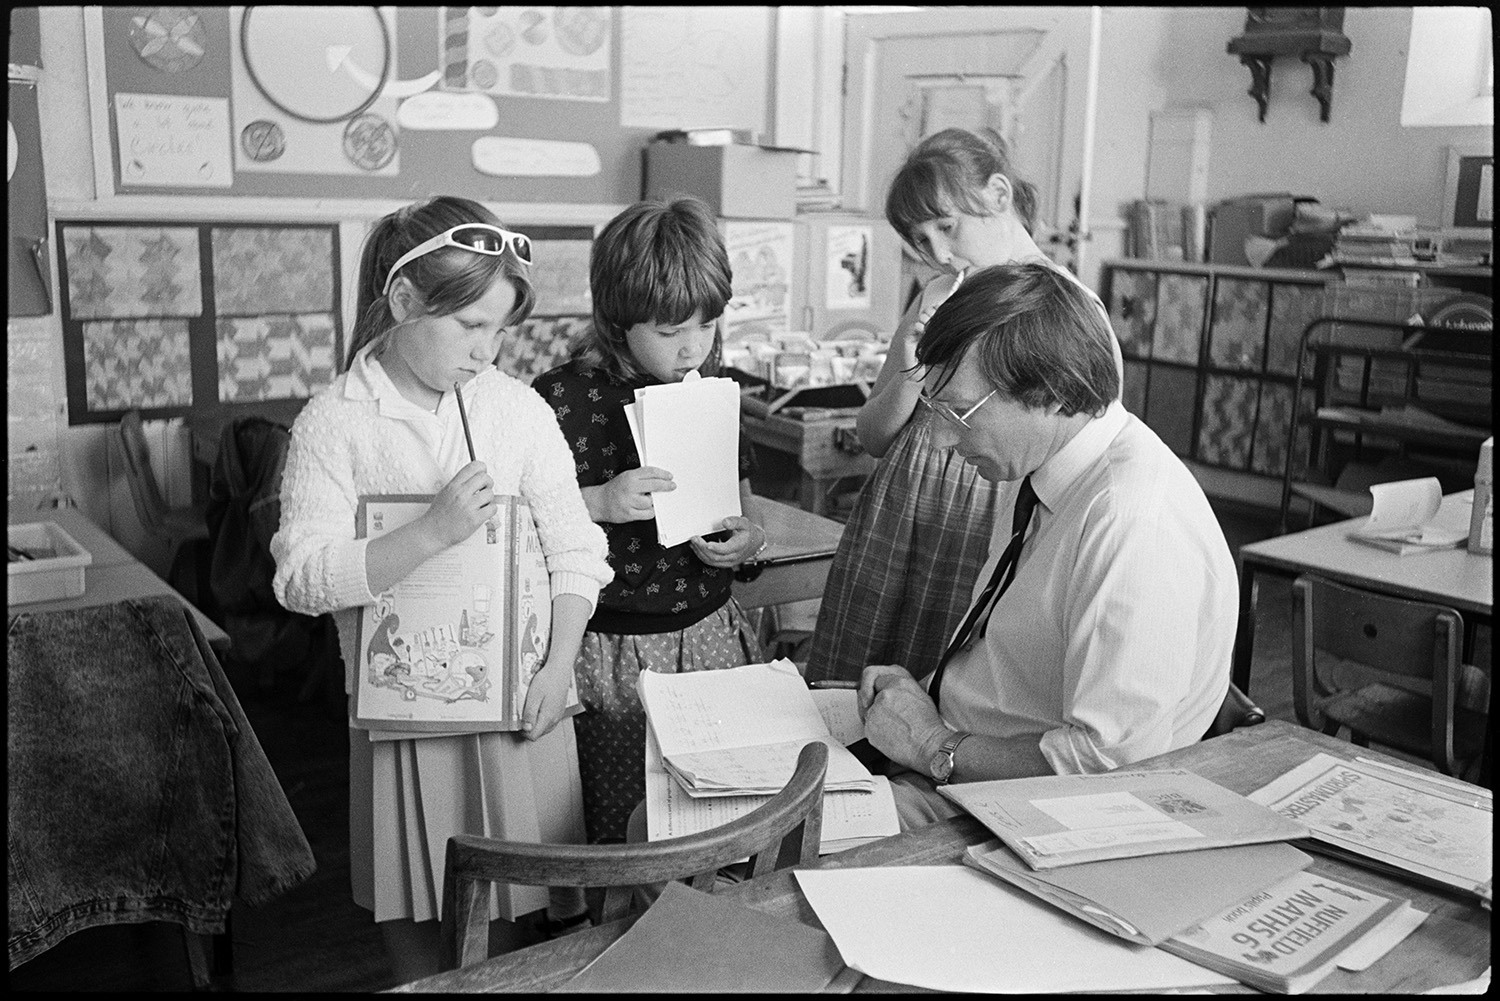 Primary school. Teacher helping pupils. Children working outside in hot sun.
[Richard Sampson, Headmaster, working with children in the classroom at Chulmleigh Primary School. Desks and displays of children's work can be seen in the background.]